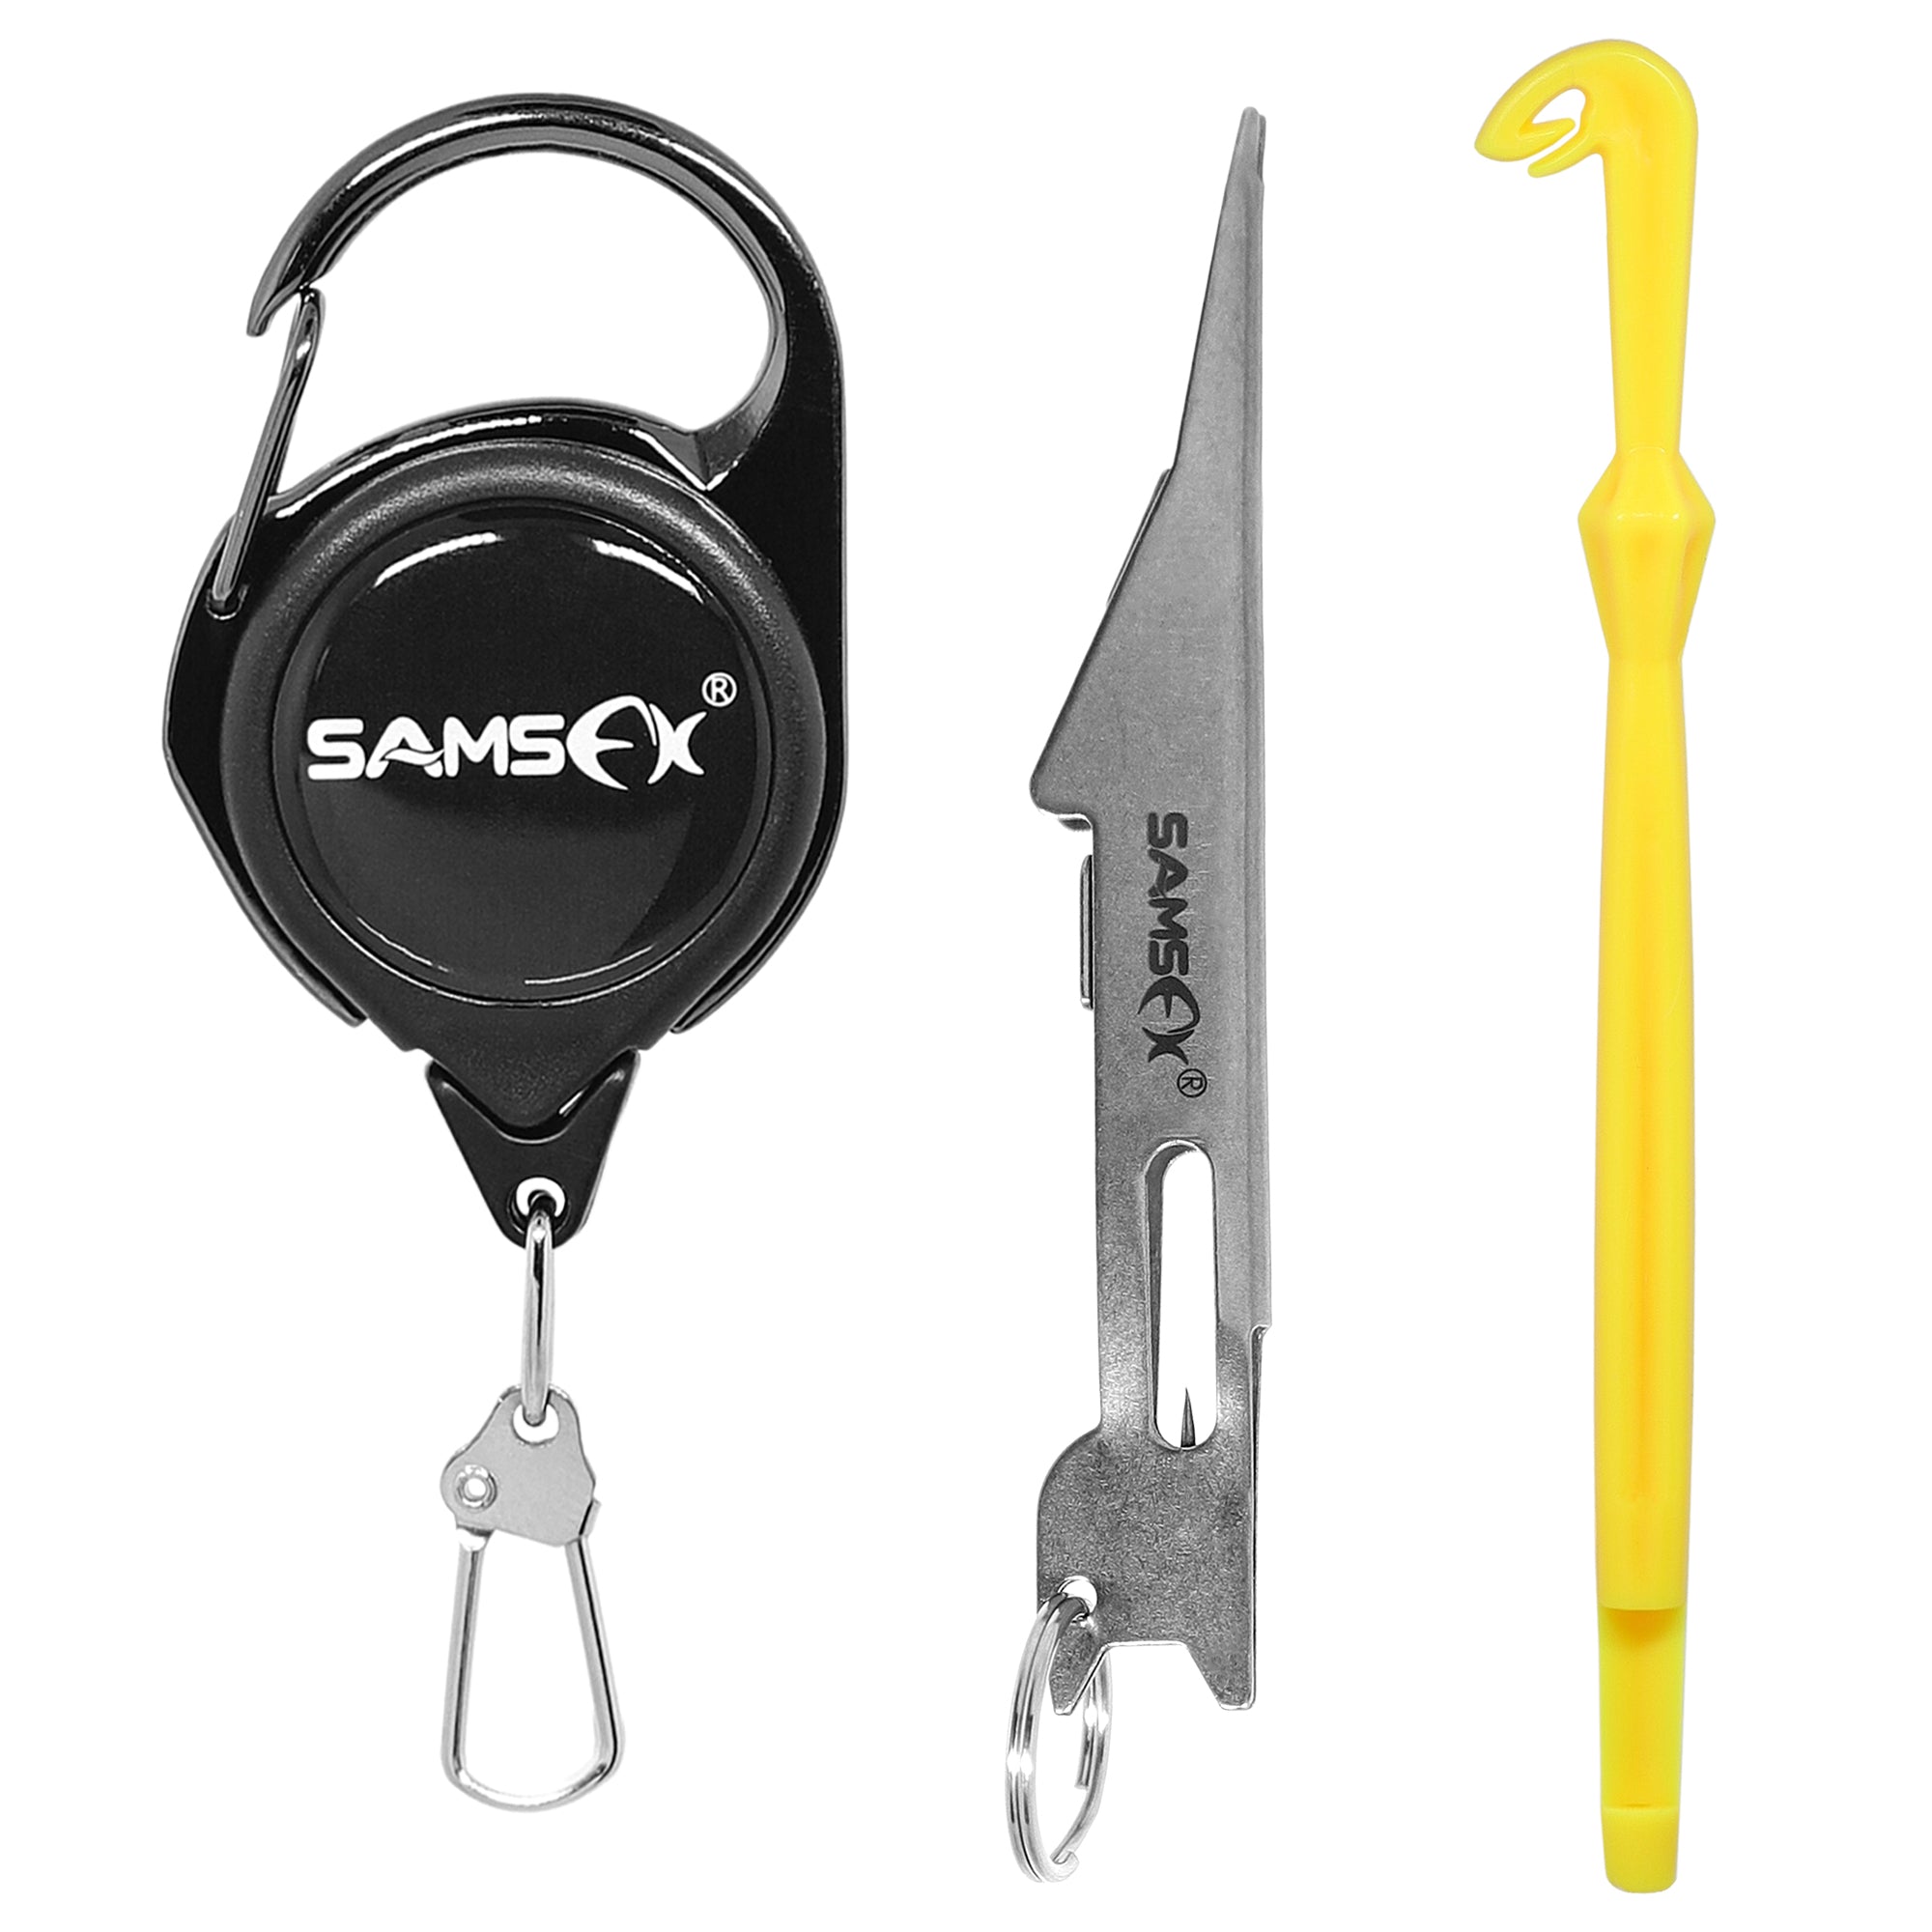  SAMSFX Fishing Tungsten Line Cutter with Zinger Retractors,  Fishing Pliers Cutters, Knot Tying Tool, Hook Eye Cleaner, Hook Sharpener,  Tune Baits & Loop Tyer Tool (Gray Line Cutter with Retractor) 